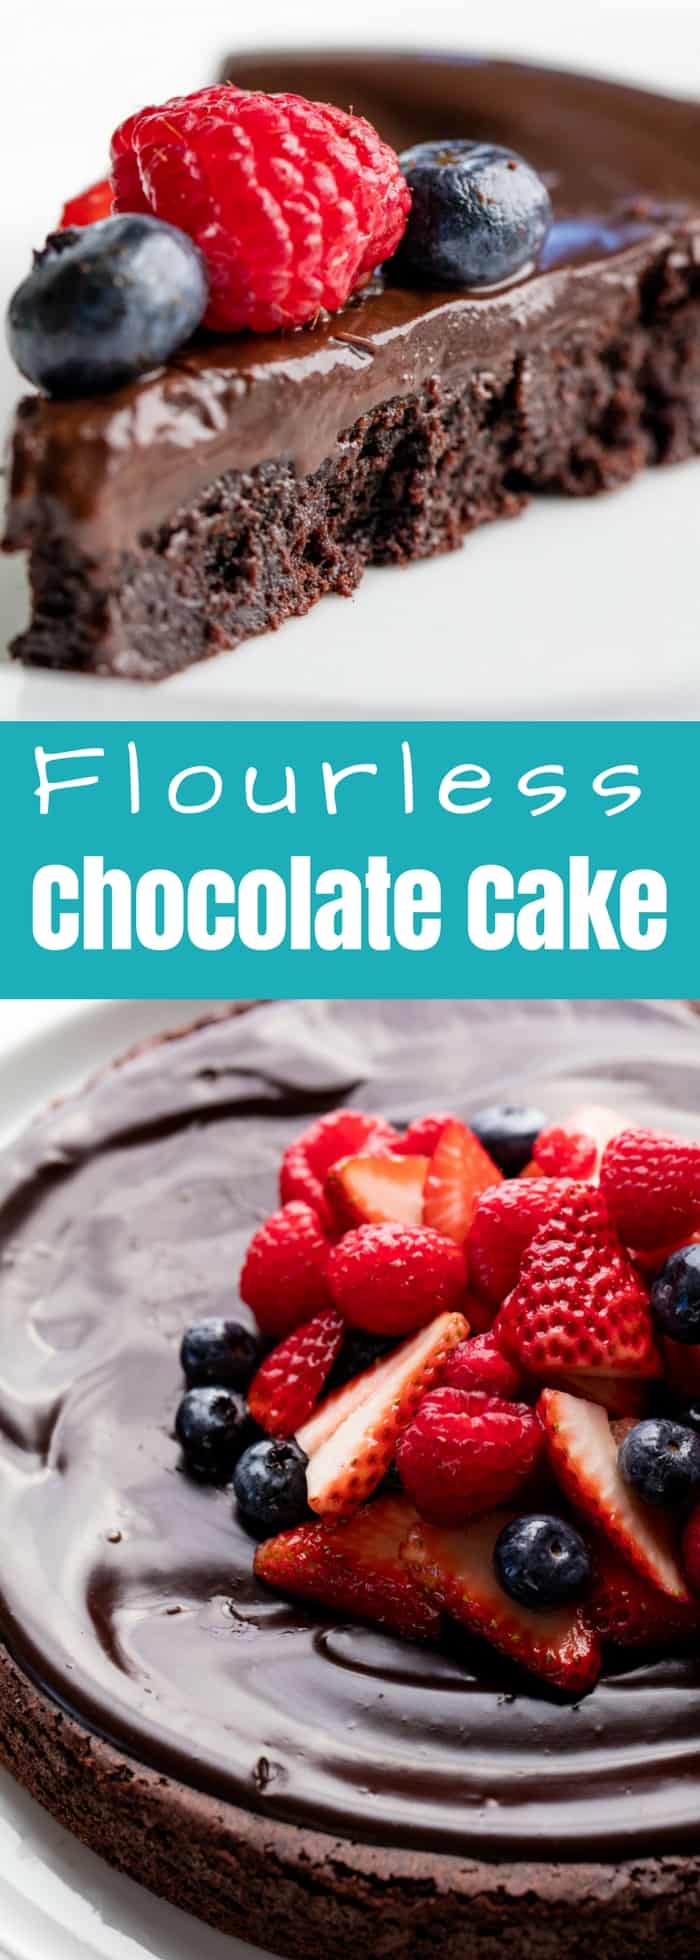 Flourless Chocolate Cake is rich, dense, and fudgy and incredibly easy to make. It's a classic chocolate cake recipe that also just so happens to be gluten-free.